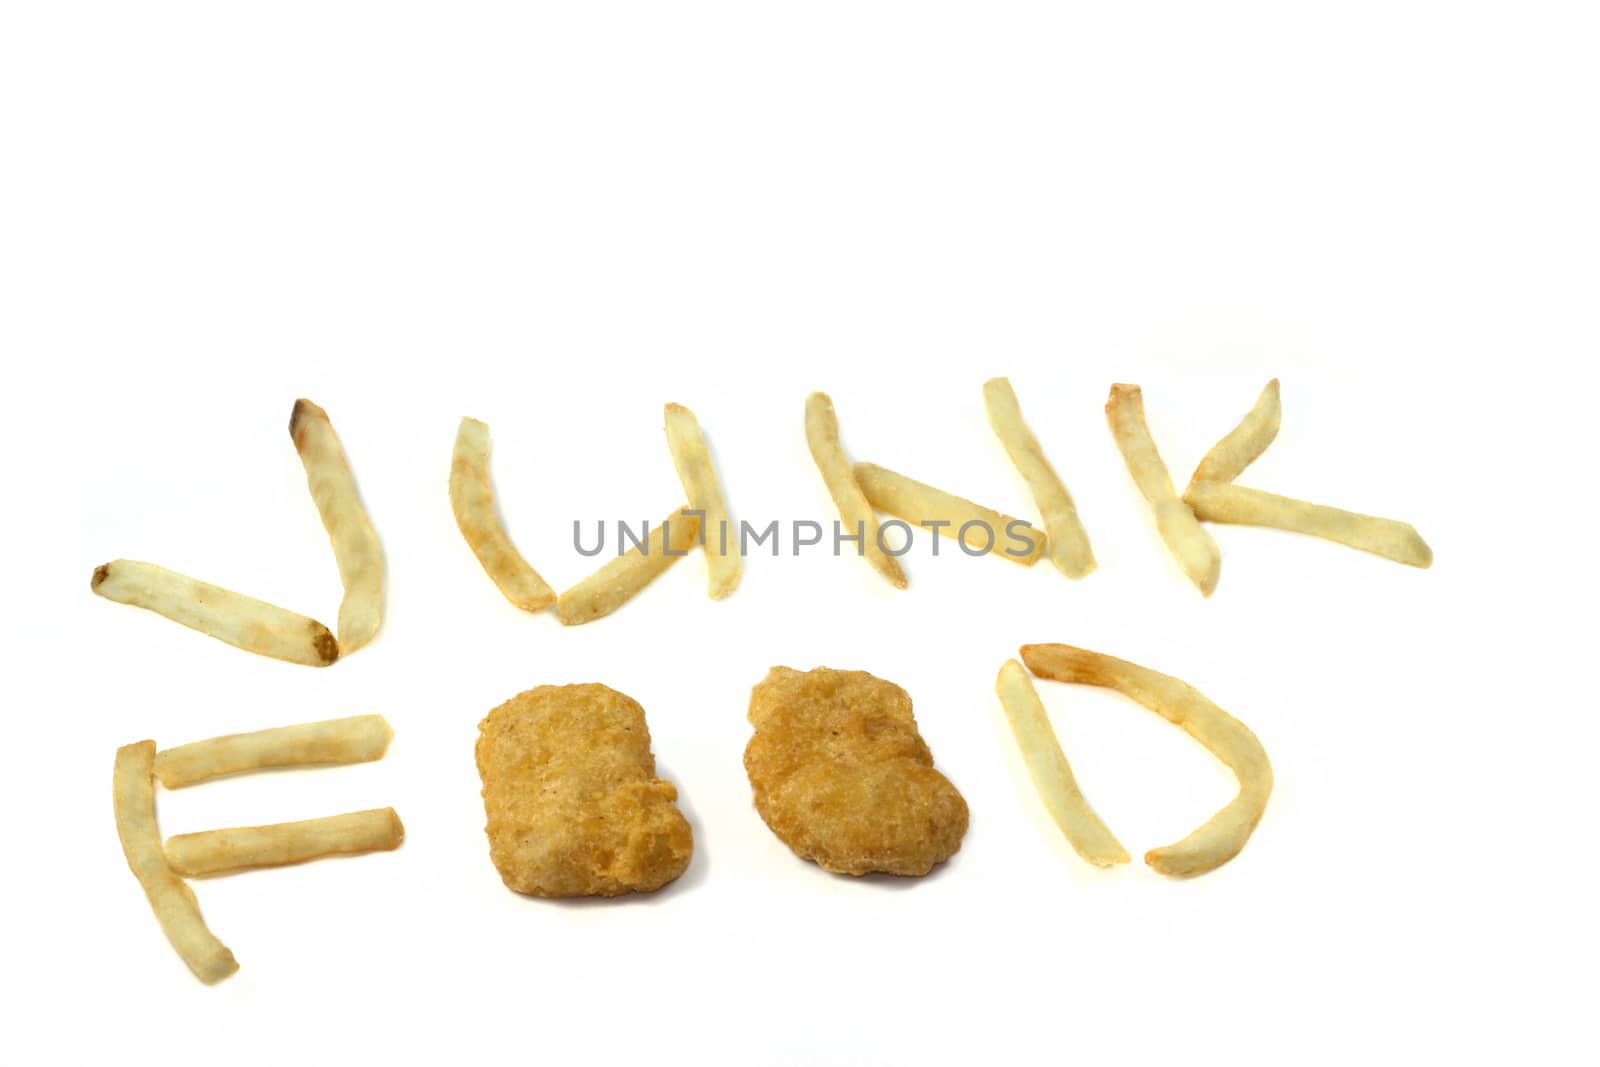 Junk Food created from fries and chichek nuggets